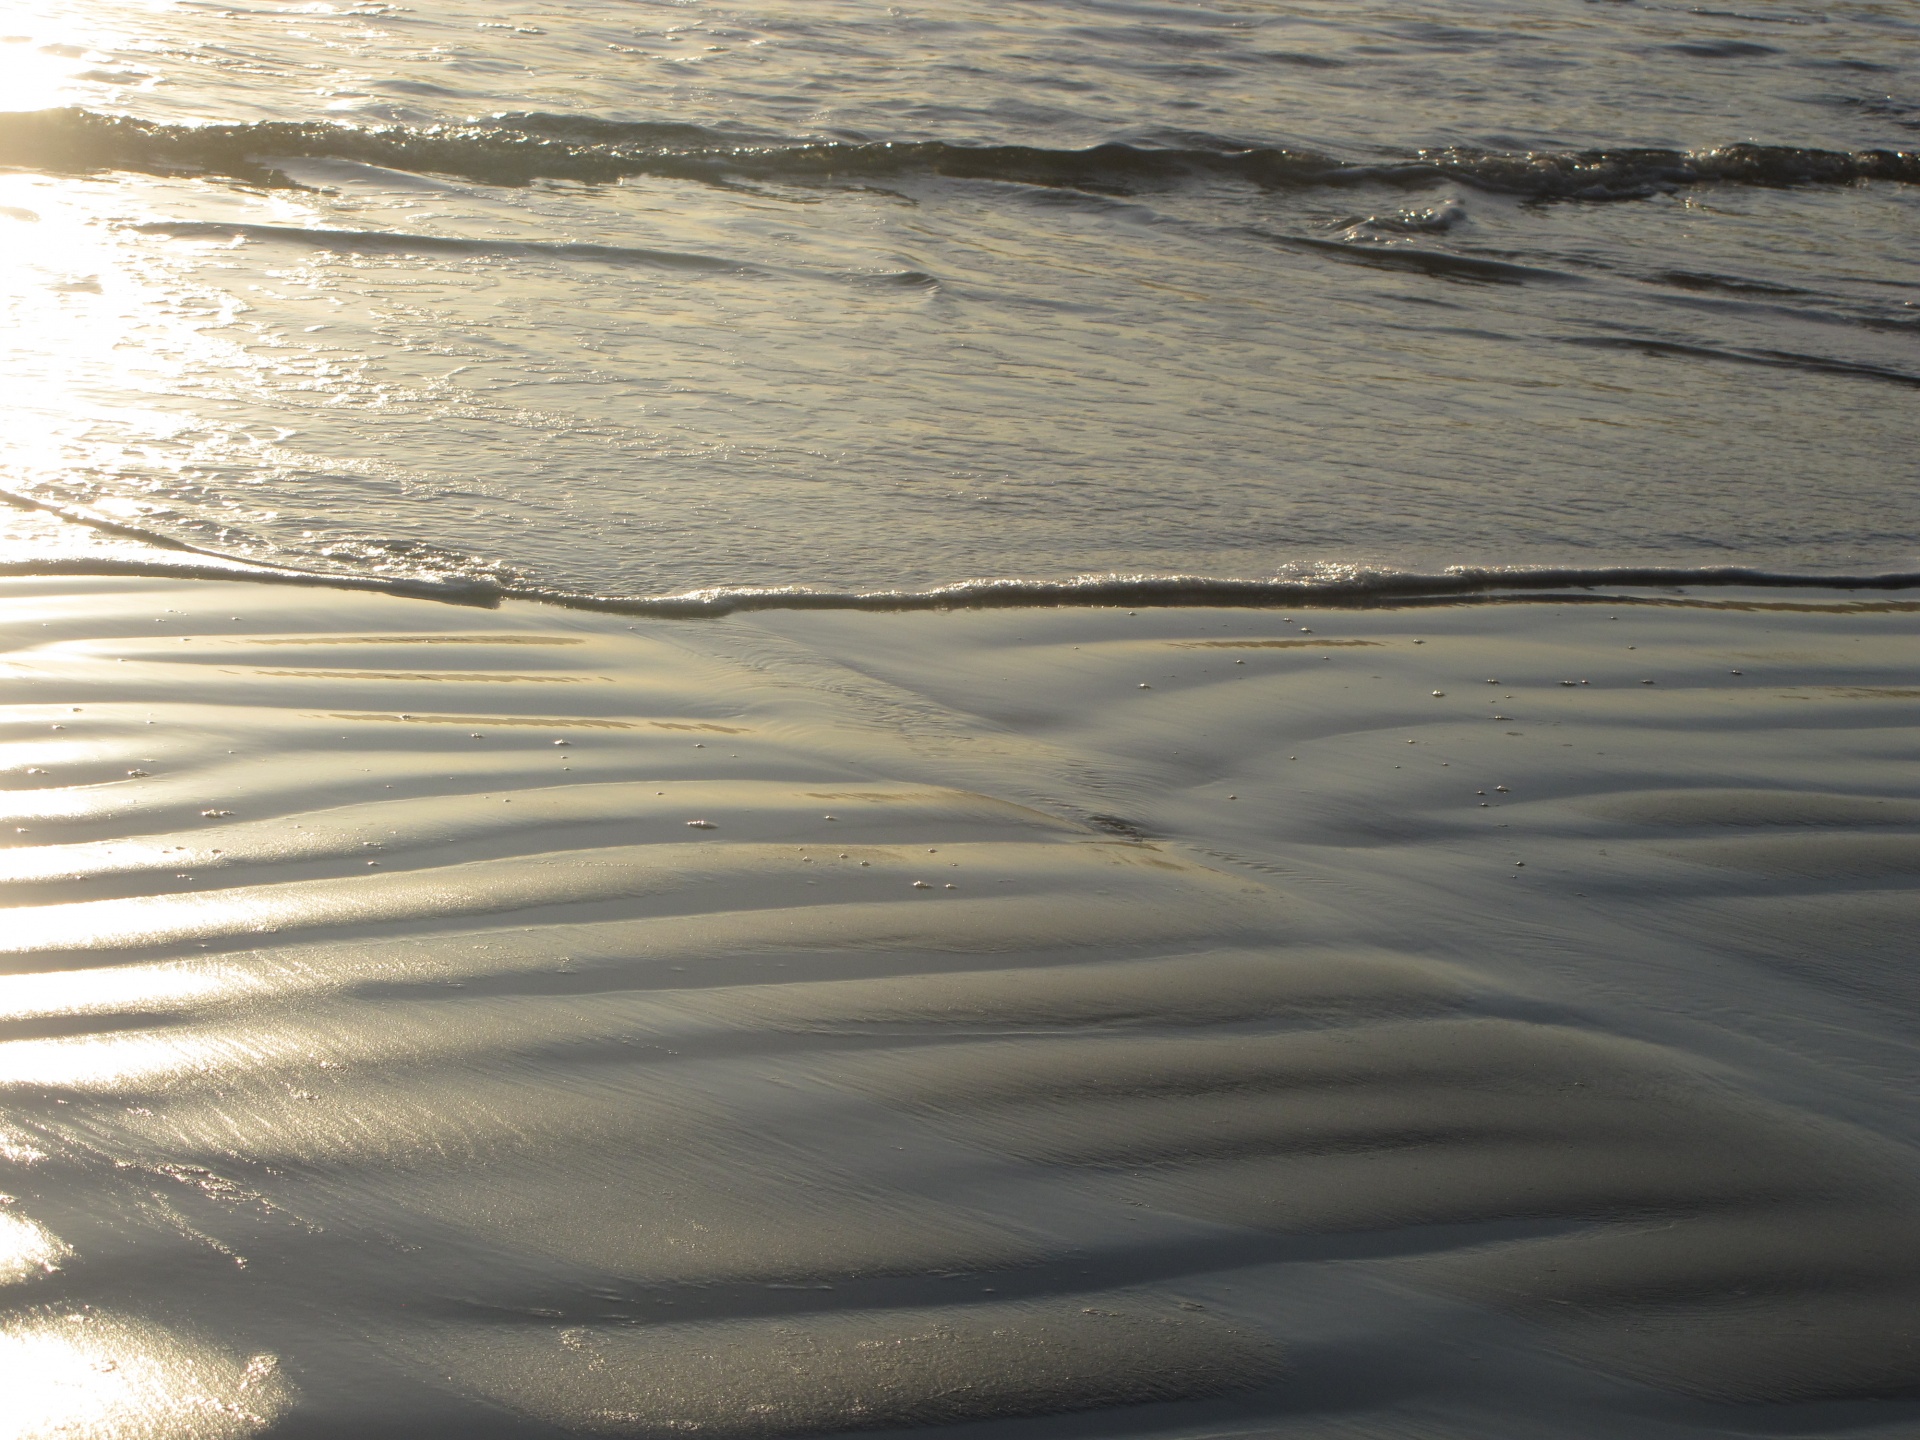 Wet sand and gentle waves on beach